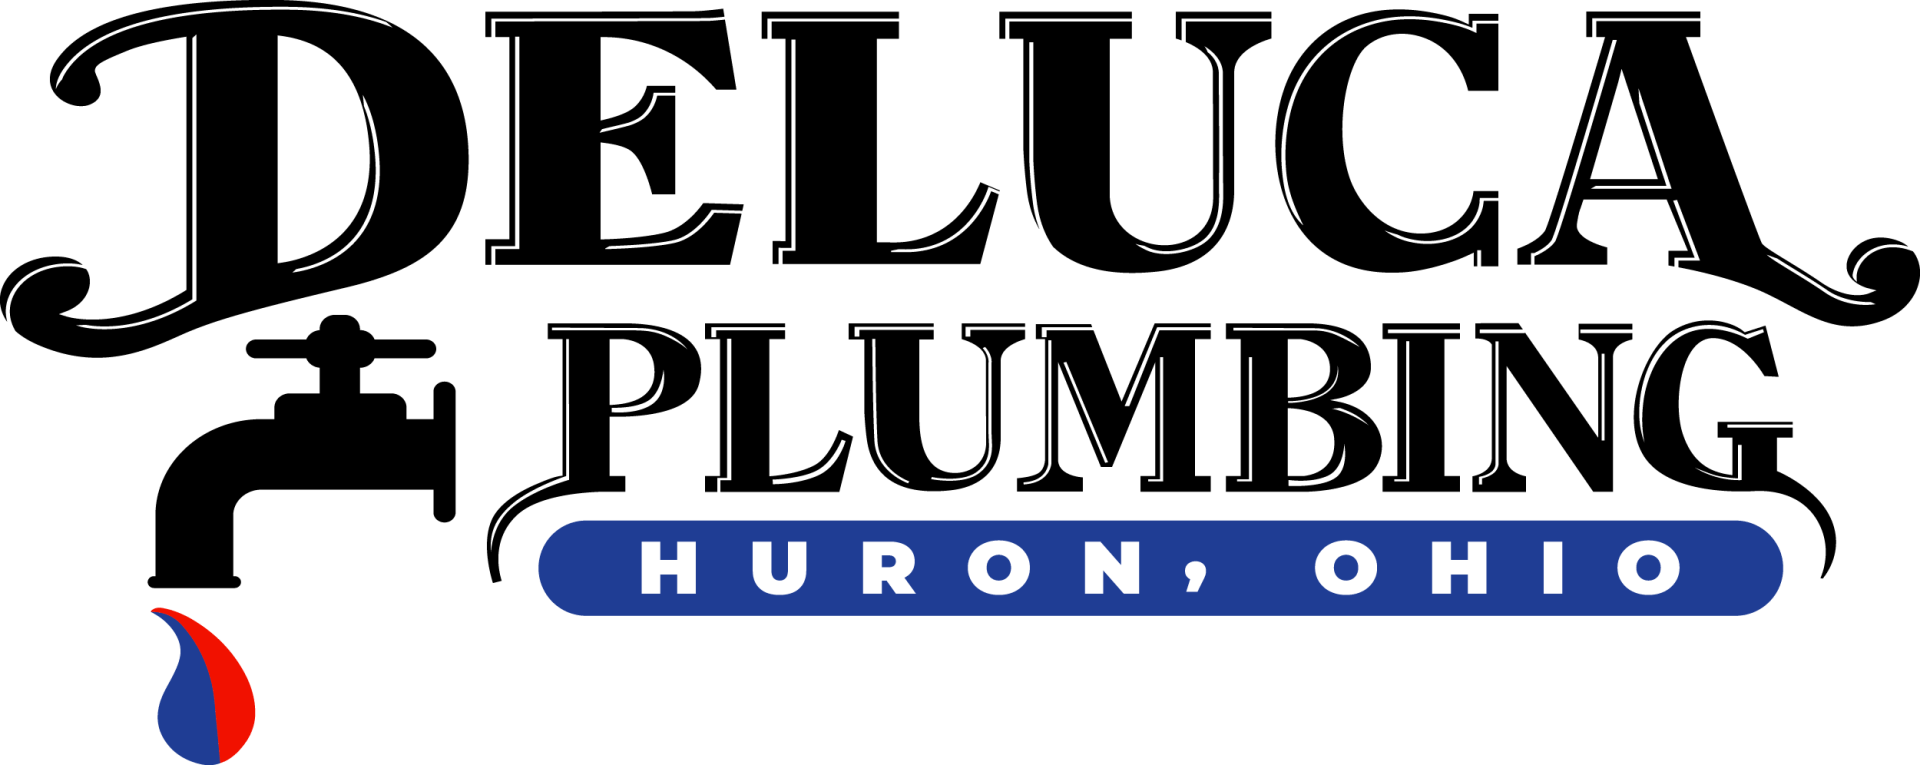 Deluca Plumbing — Huron, OH — Engineered Process Systems